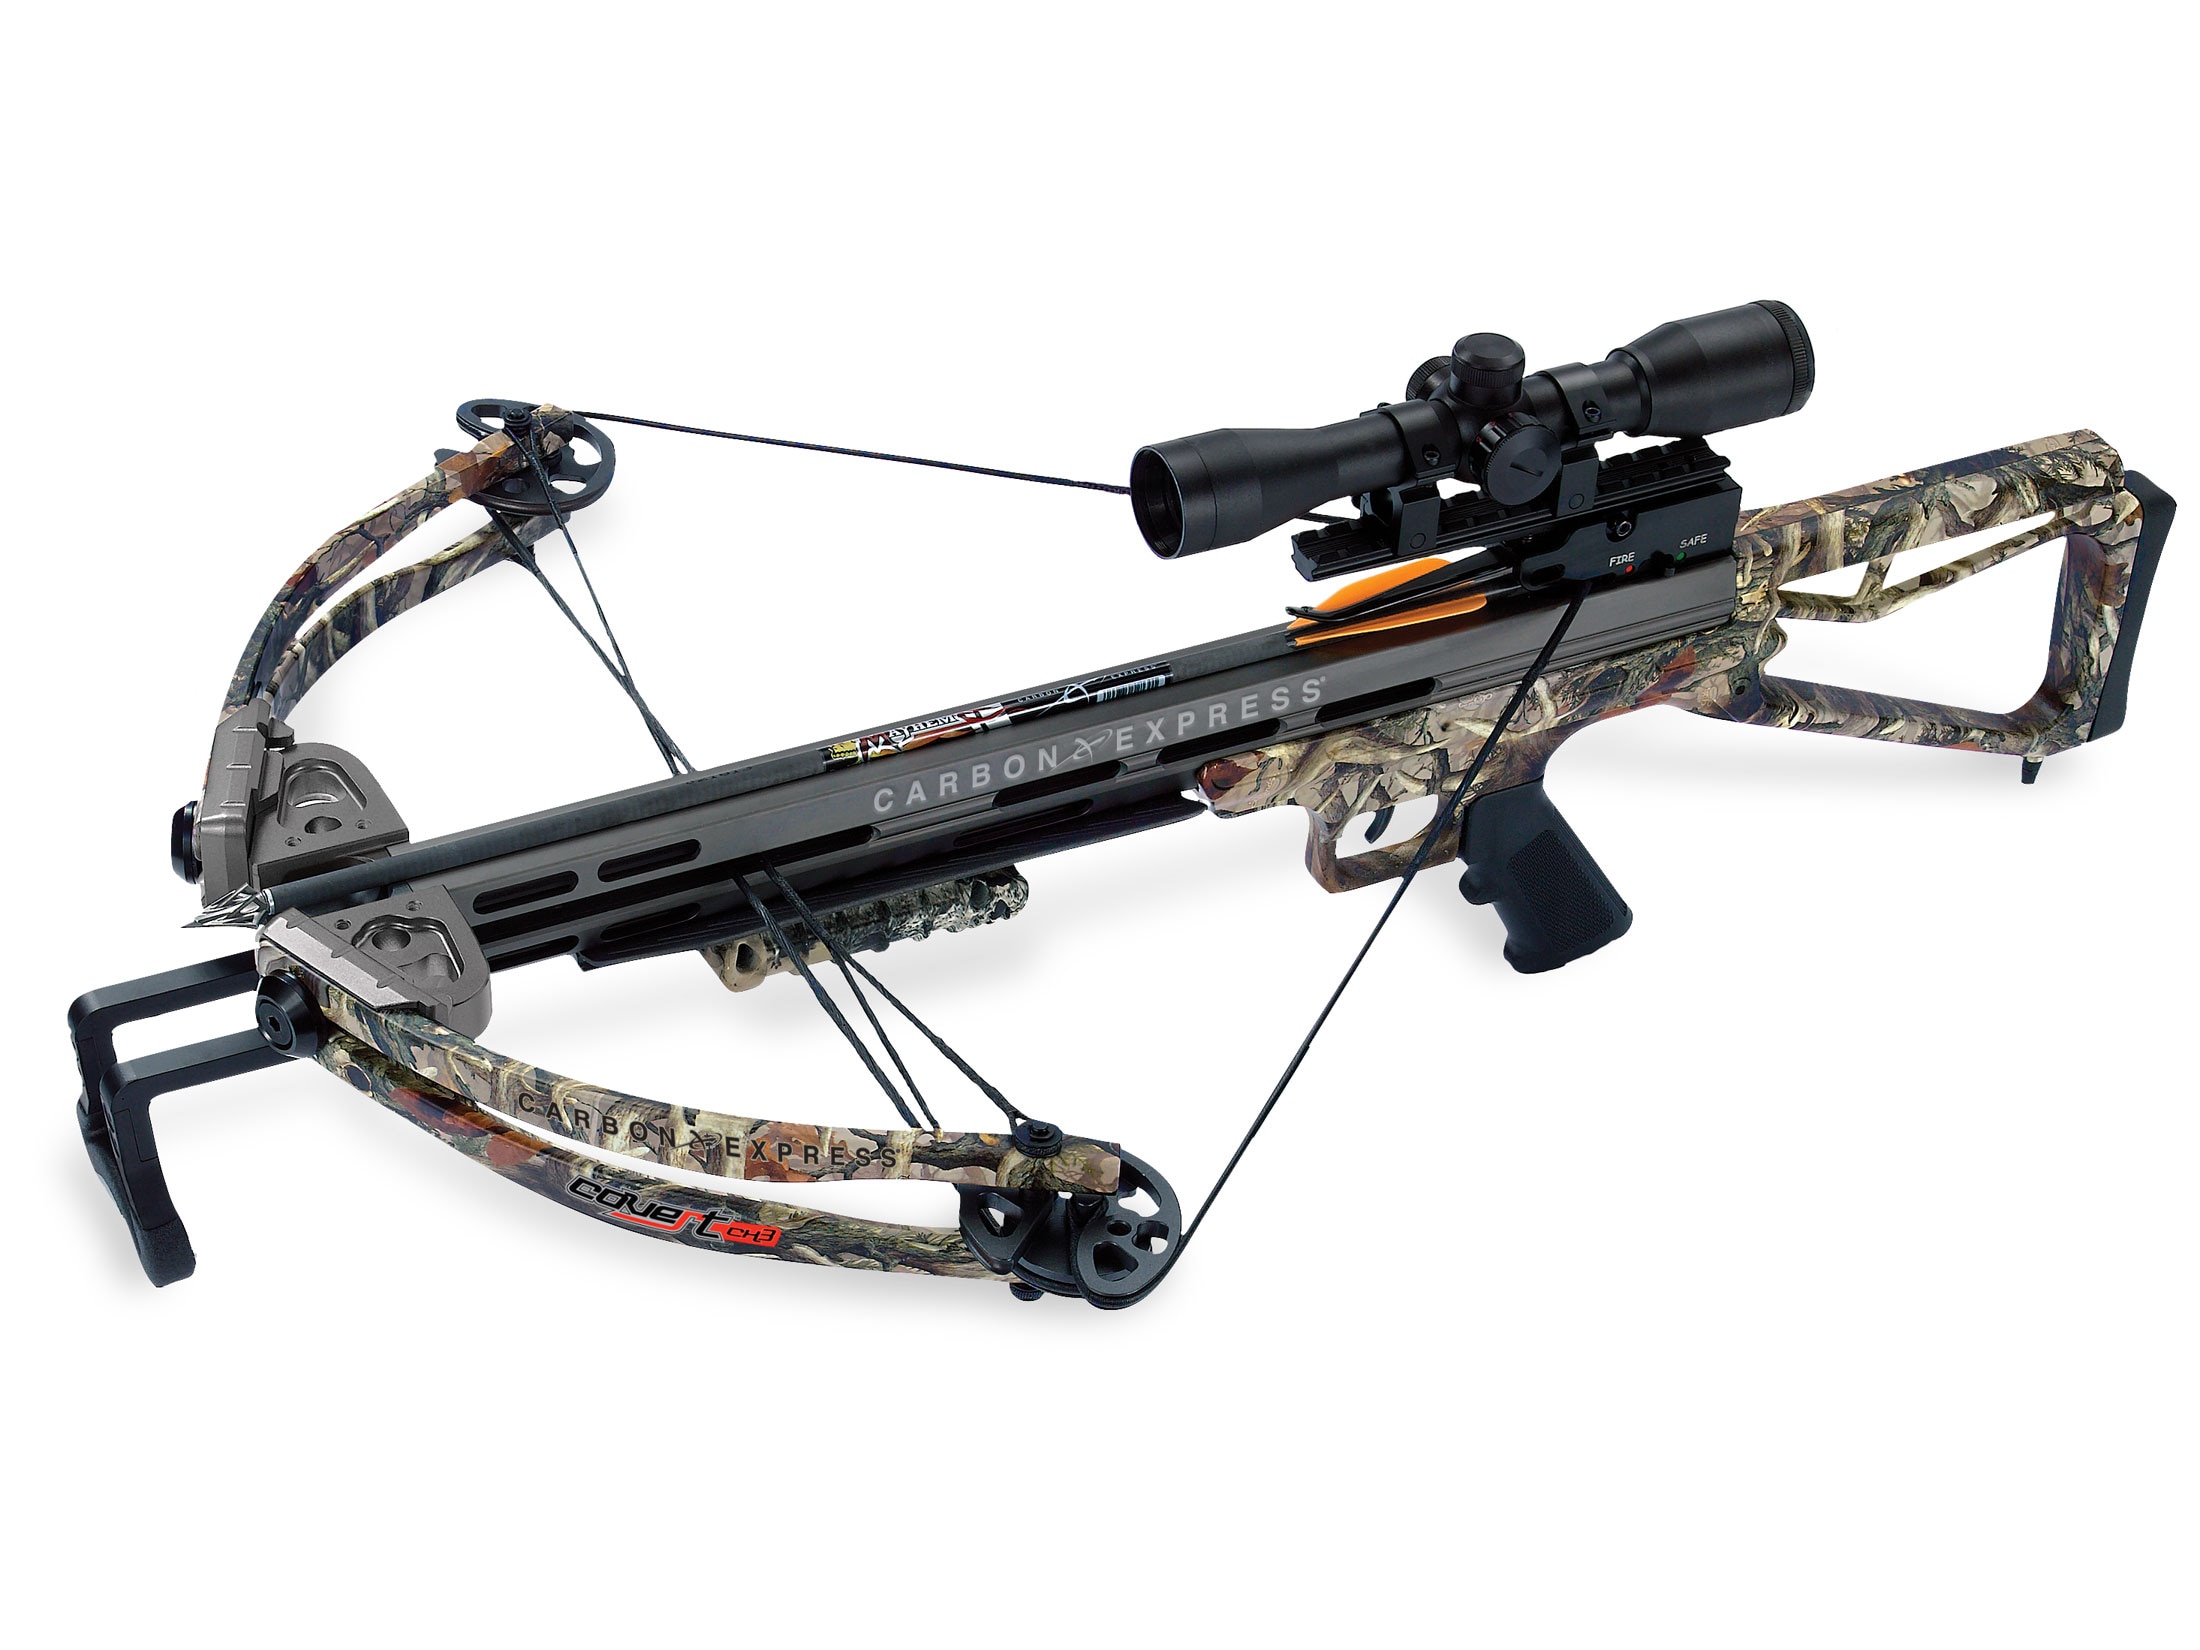 Carbon Express Covert CX-3 Crossbow Package 4x32 Glass Etched Reticle